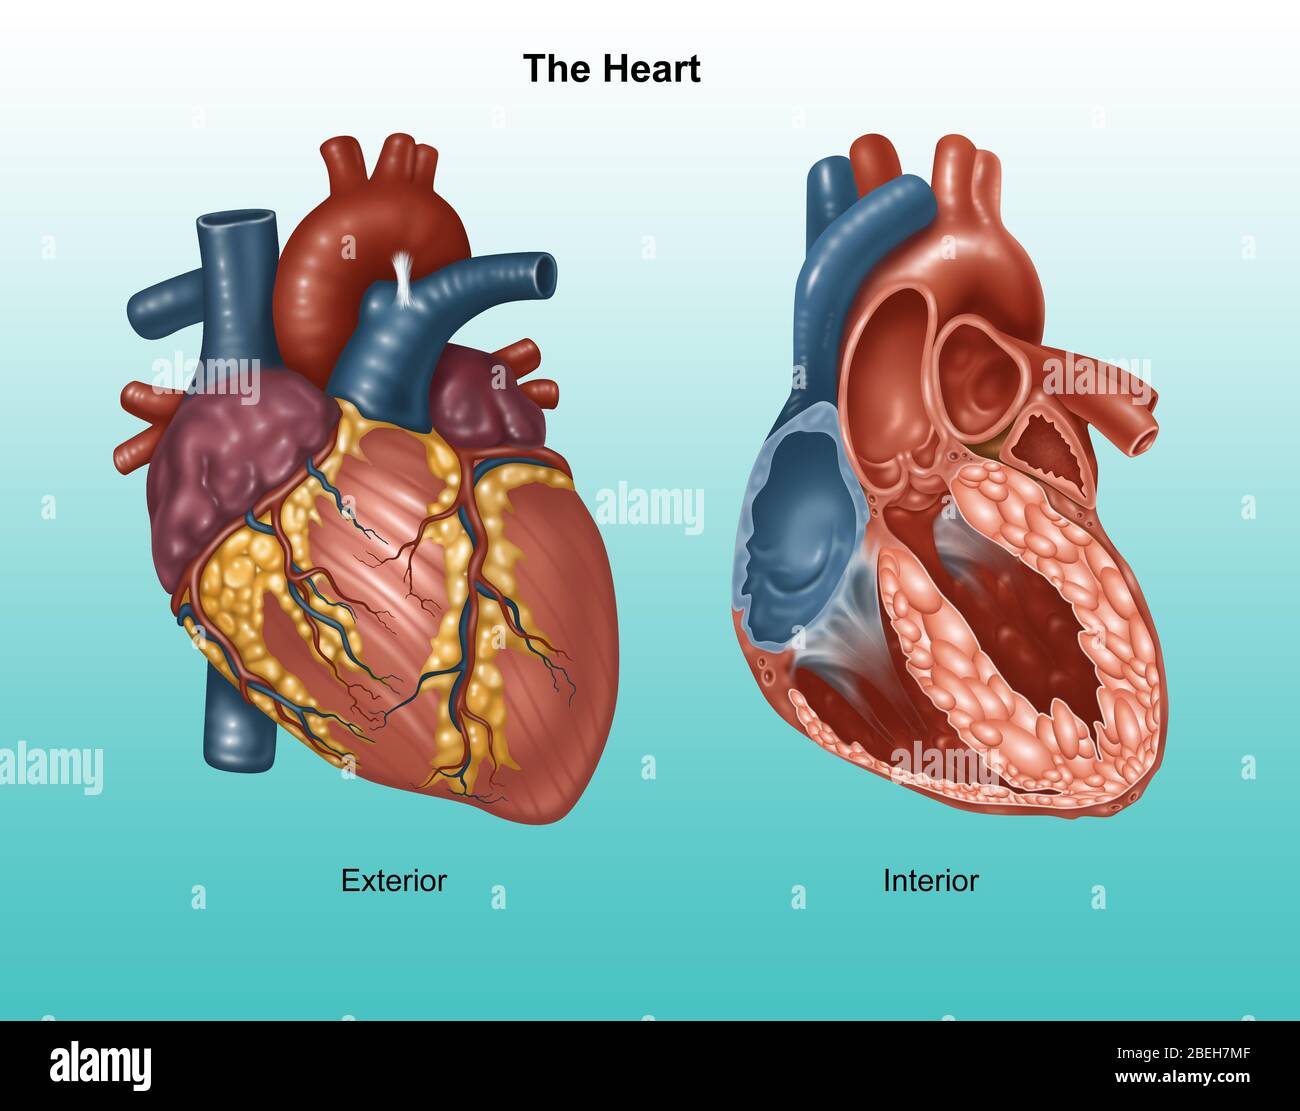 Exterior and interior of a normal heart. Illustration. Stock Photo